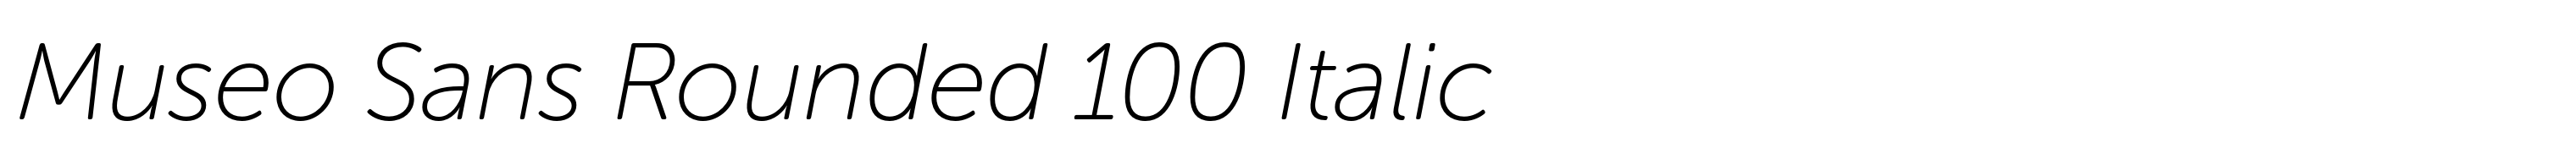 Museo Sans Rounded 100 Italic